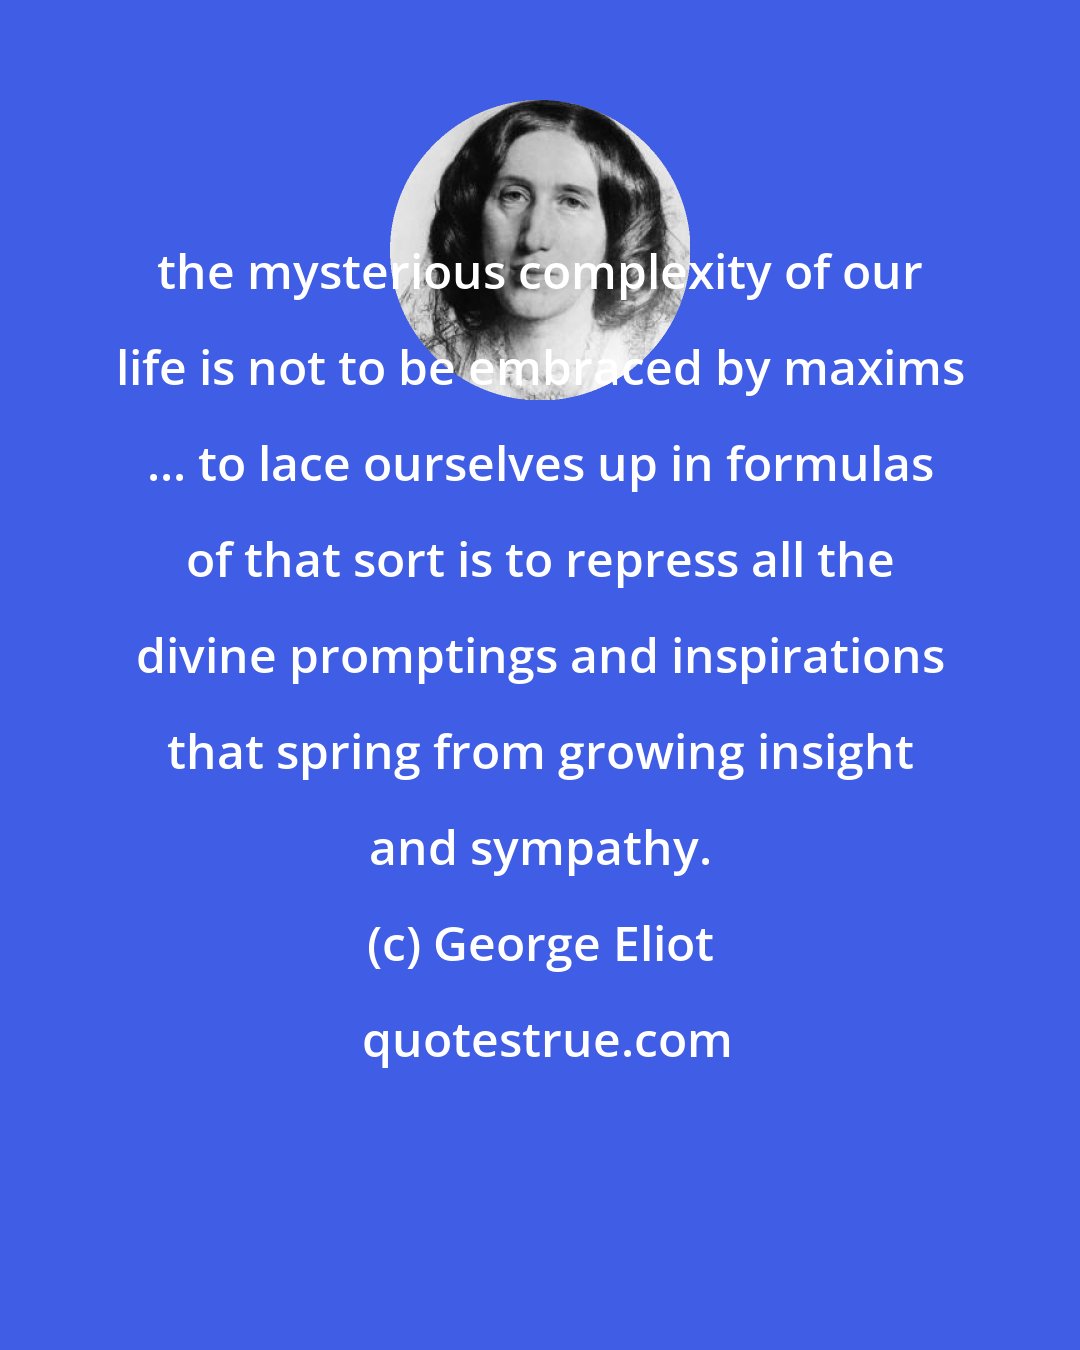 George Eliot: the mysterious complexity of our life is not to be embraced by maxims ... to lace ourselves up in formulas of that sort is to repress all the divine promptings and inspirations that spring from growing insight and sympathy.